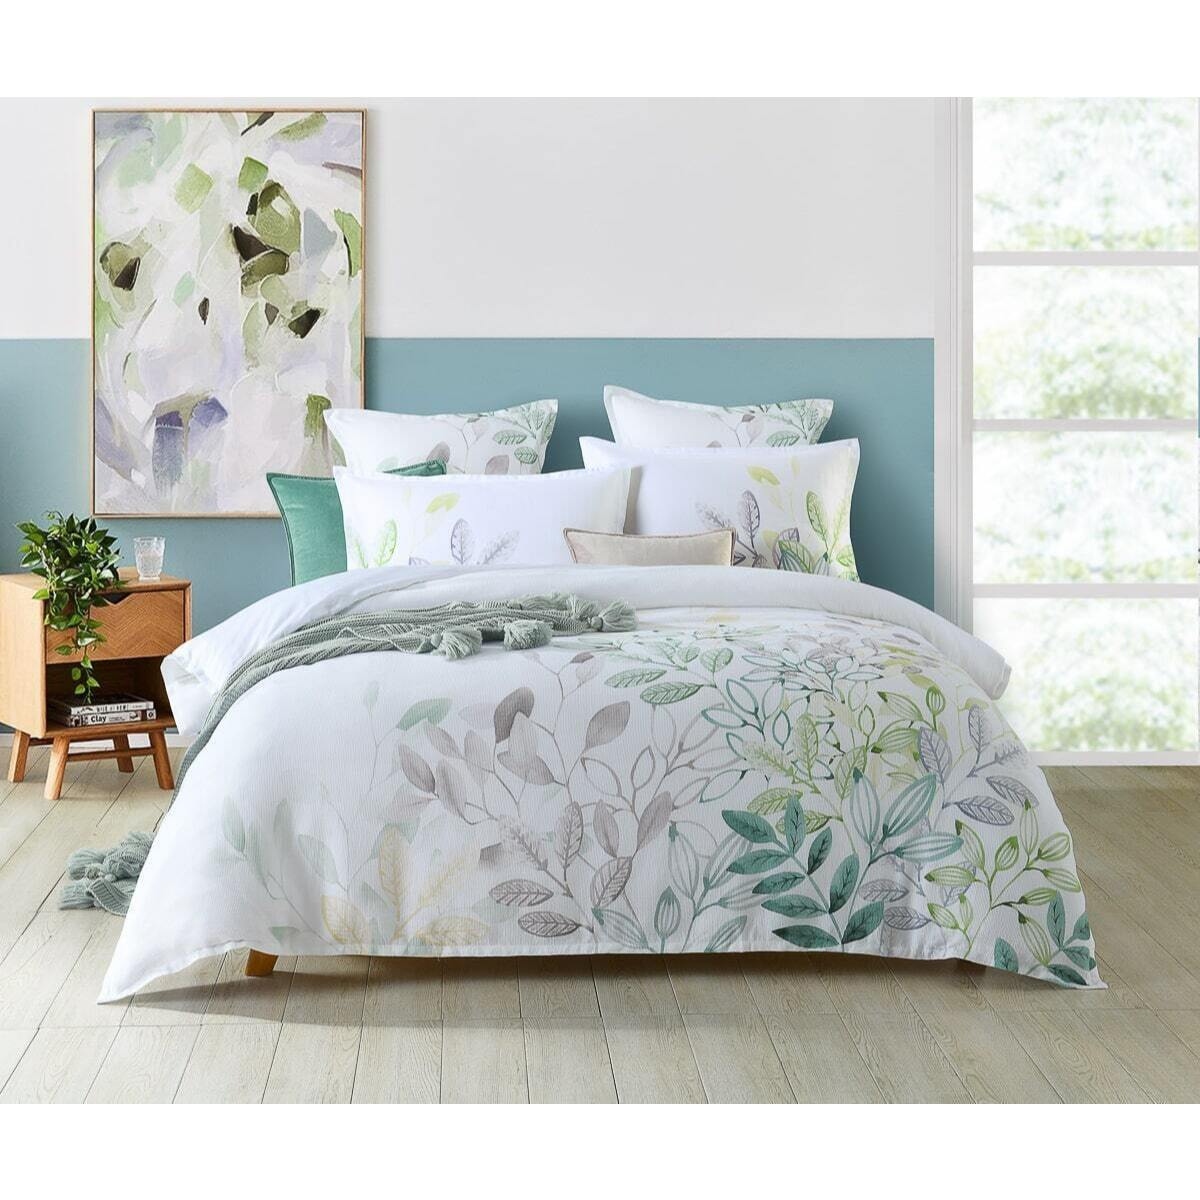 Harlyn Quilt Cover Set [SIZE: European Pillow Case]